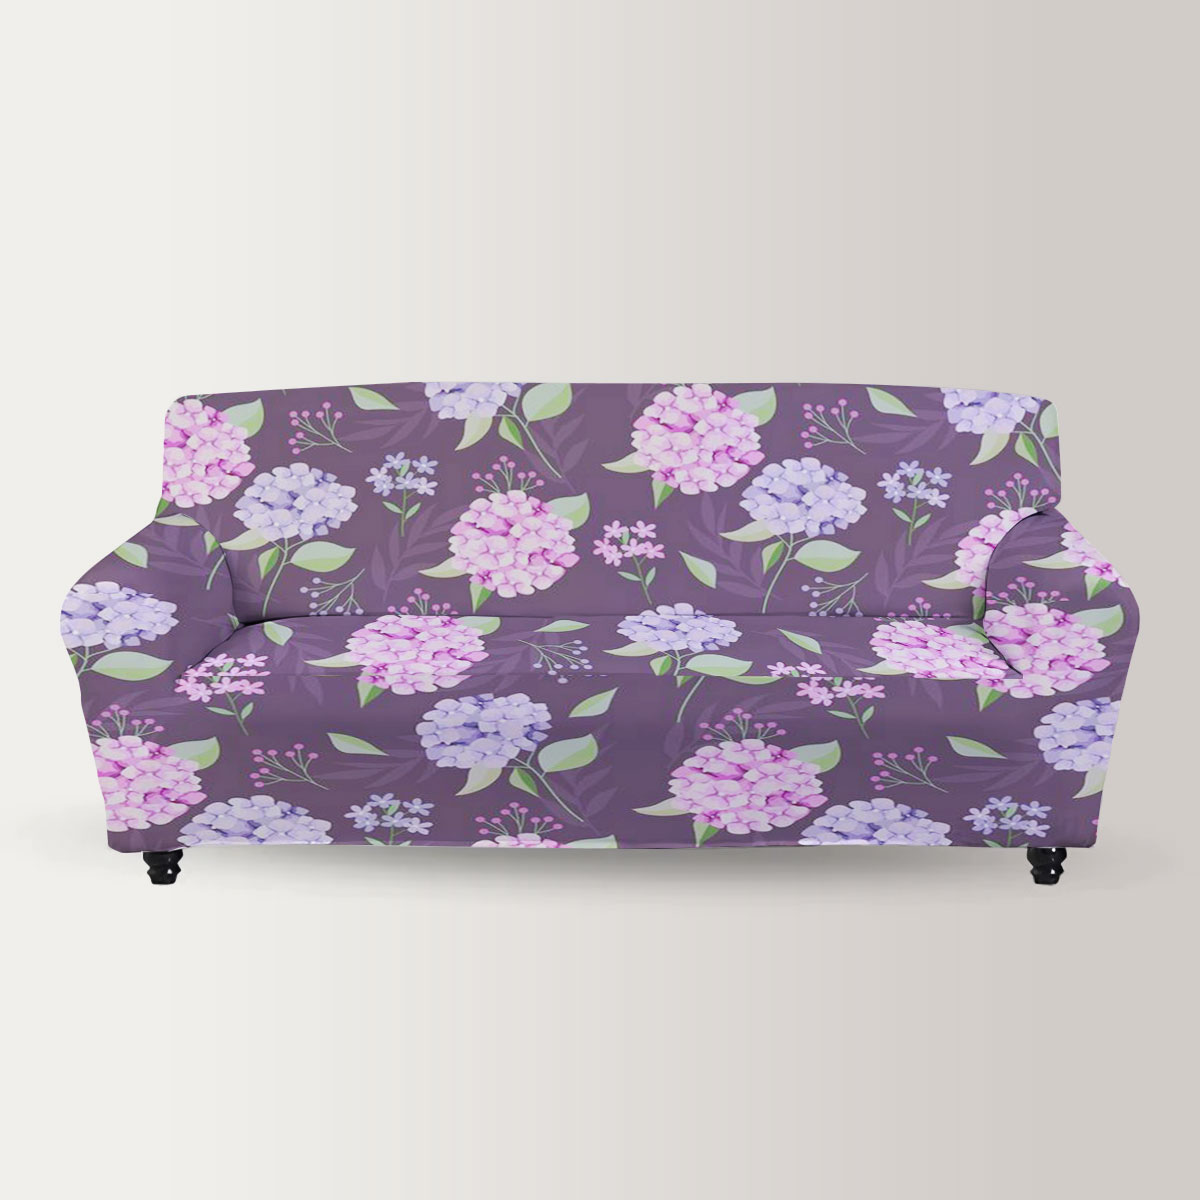 Blue Pink Hydrangea On Brown Background Sofa Cover